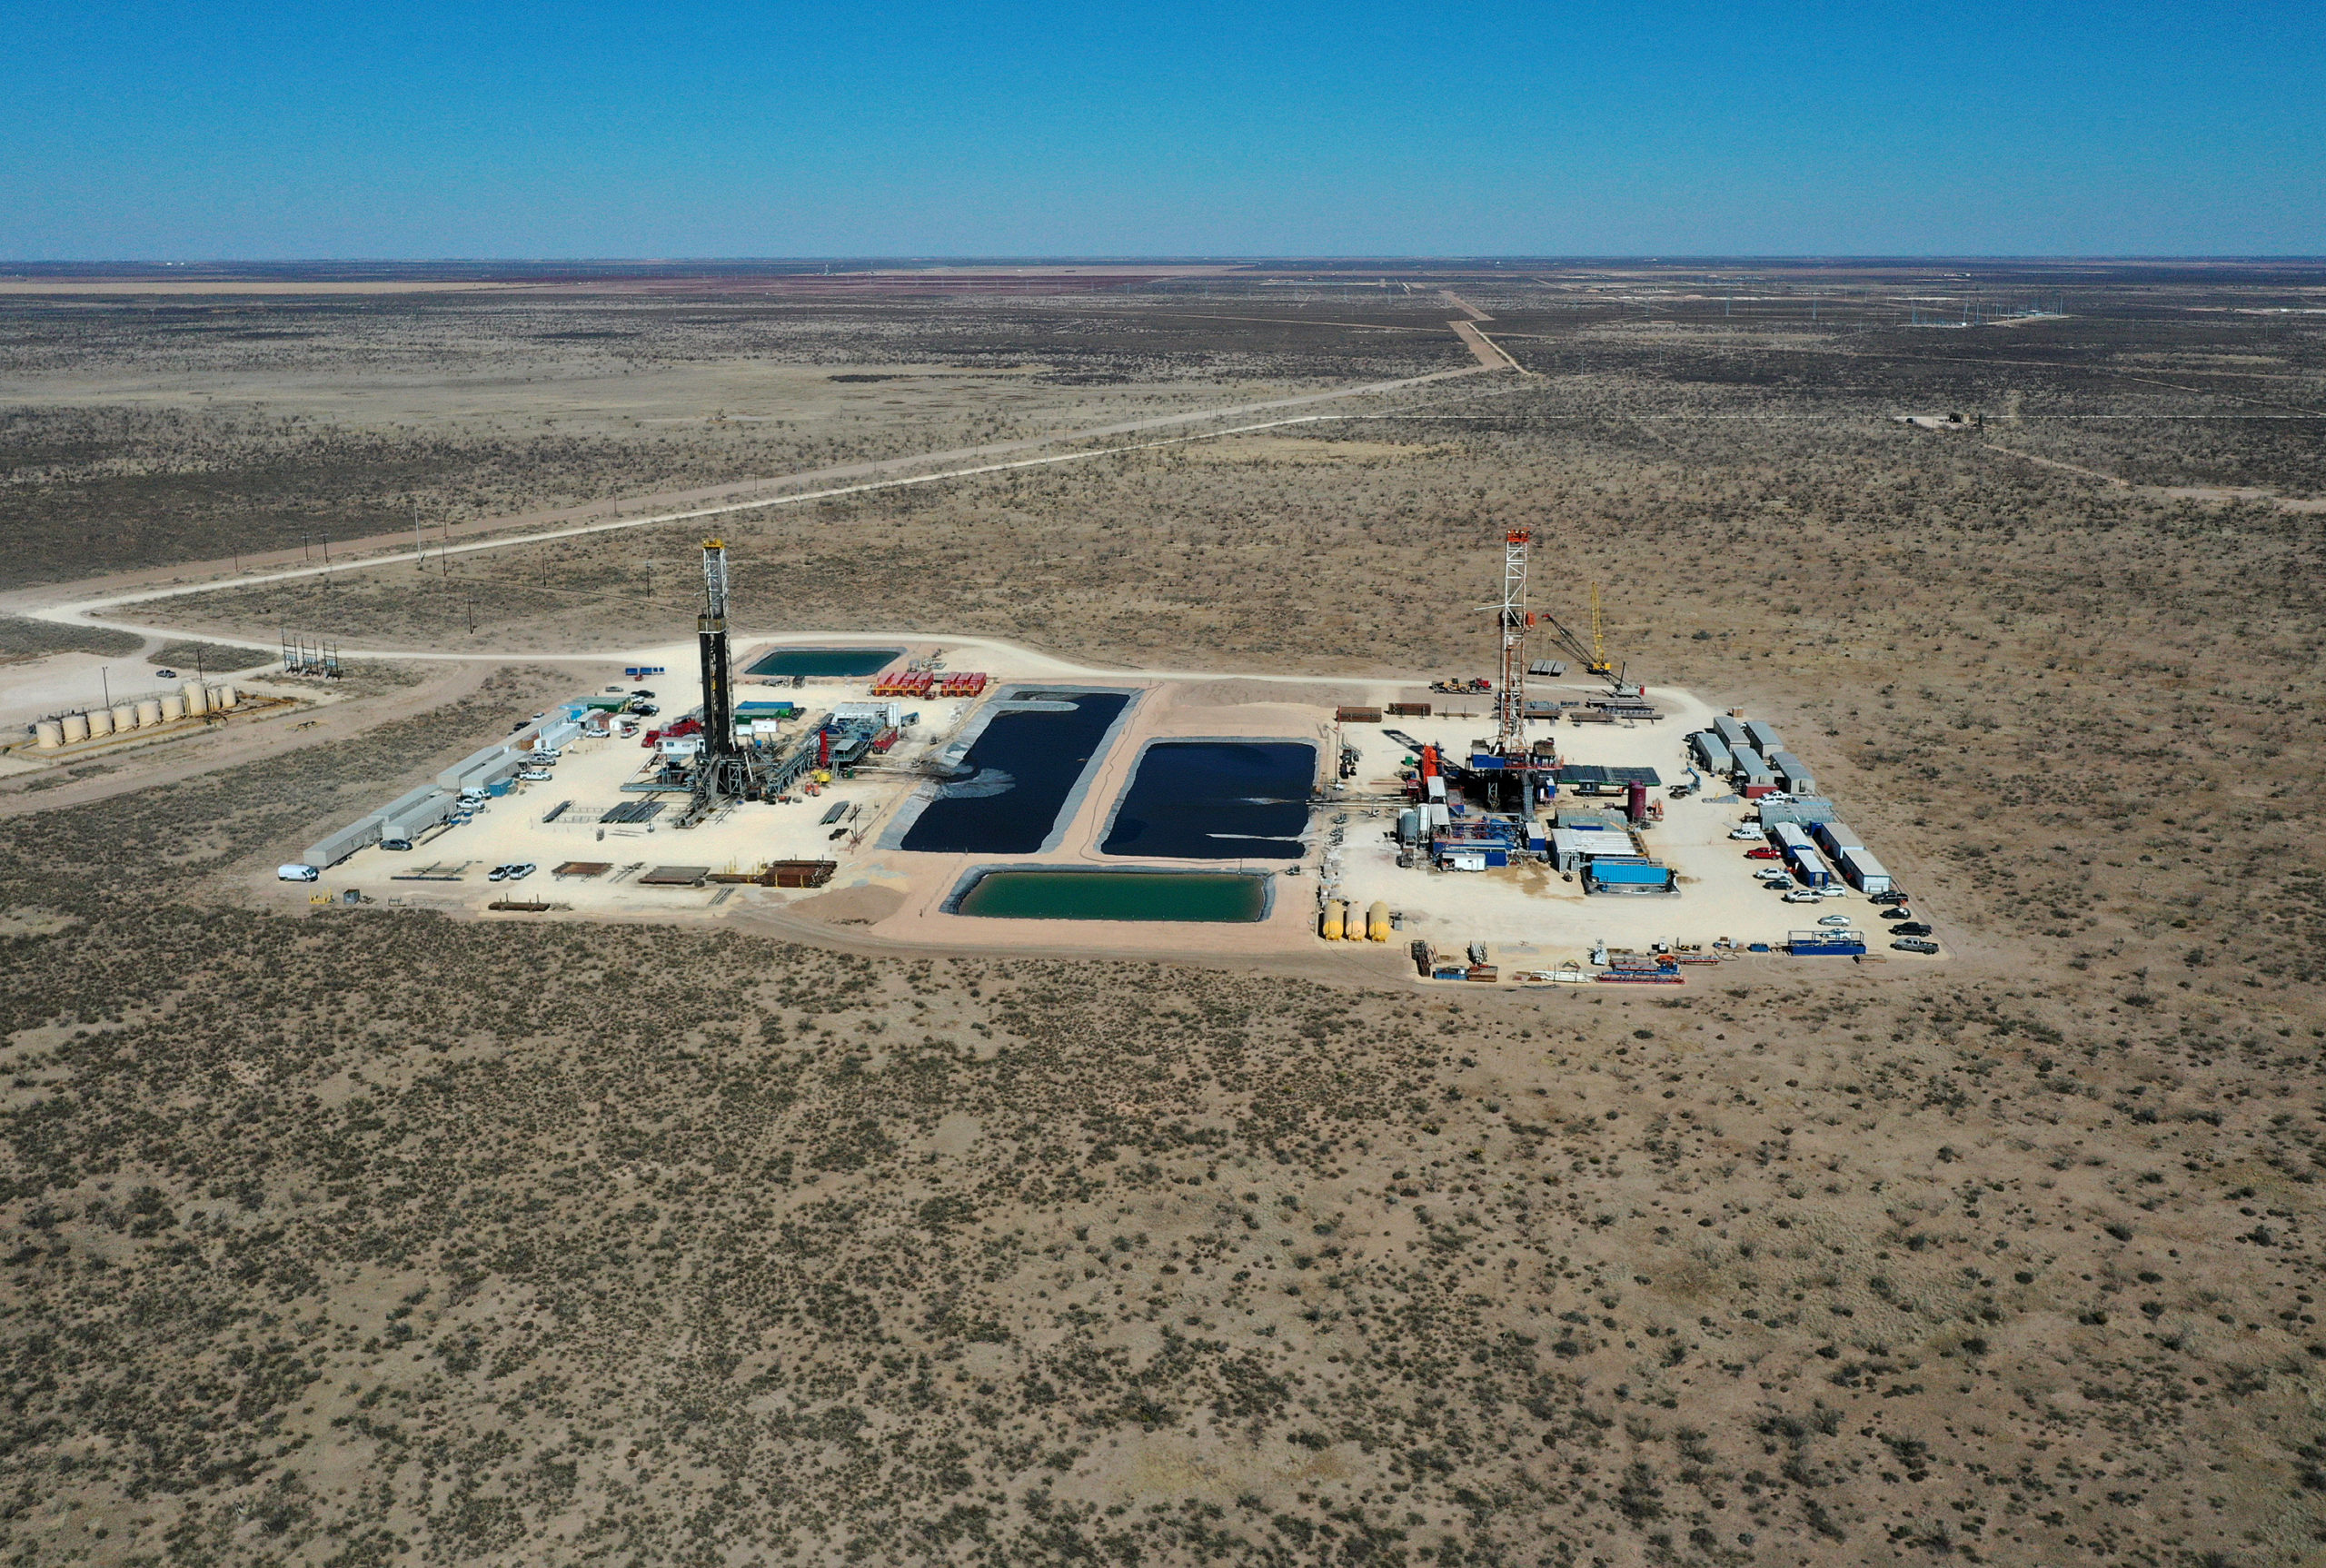 The oil drilling rig will operate in the Permian Basin oil field in Midland, Texas on March 13.  (JoeRaedle / Getty Images)